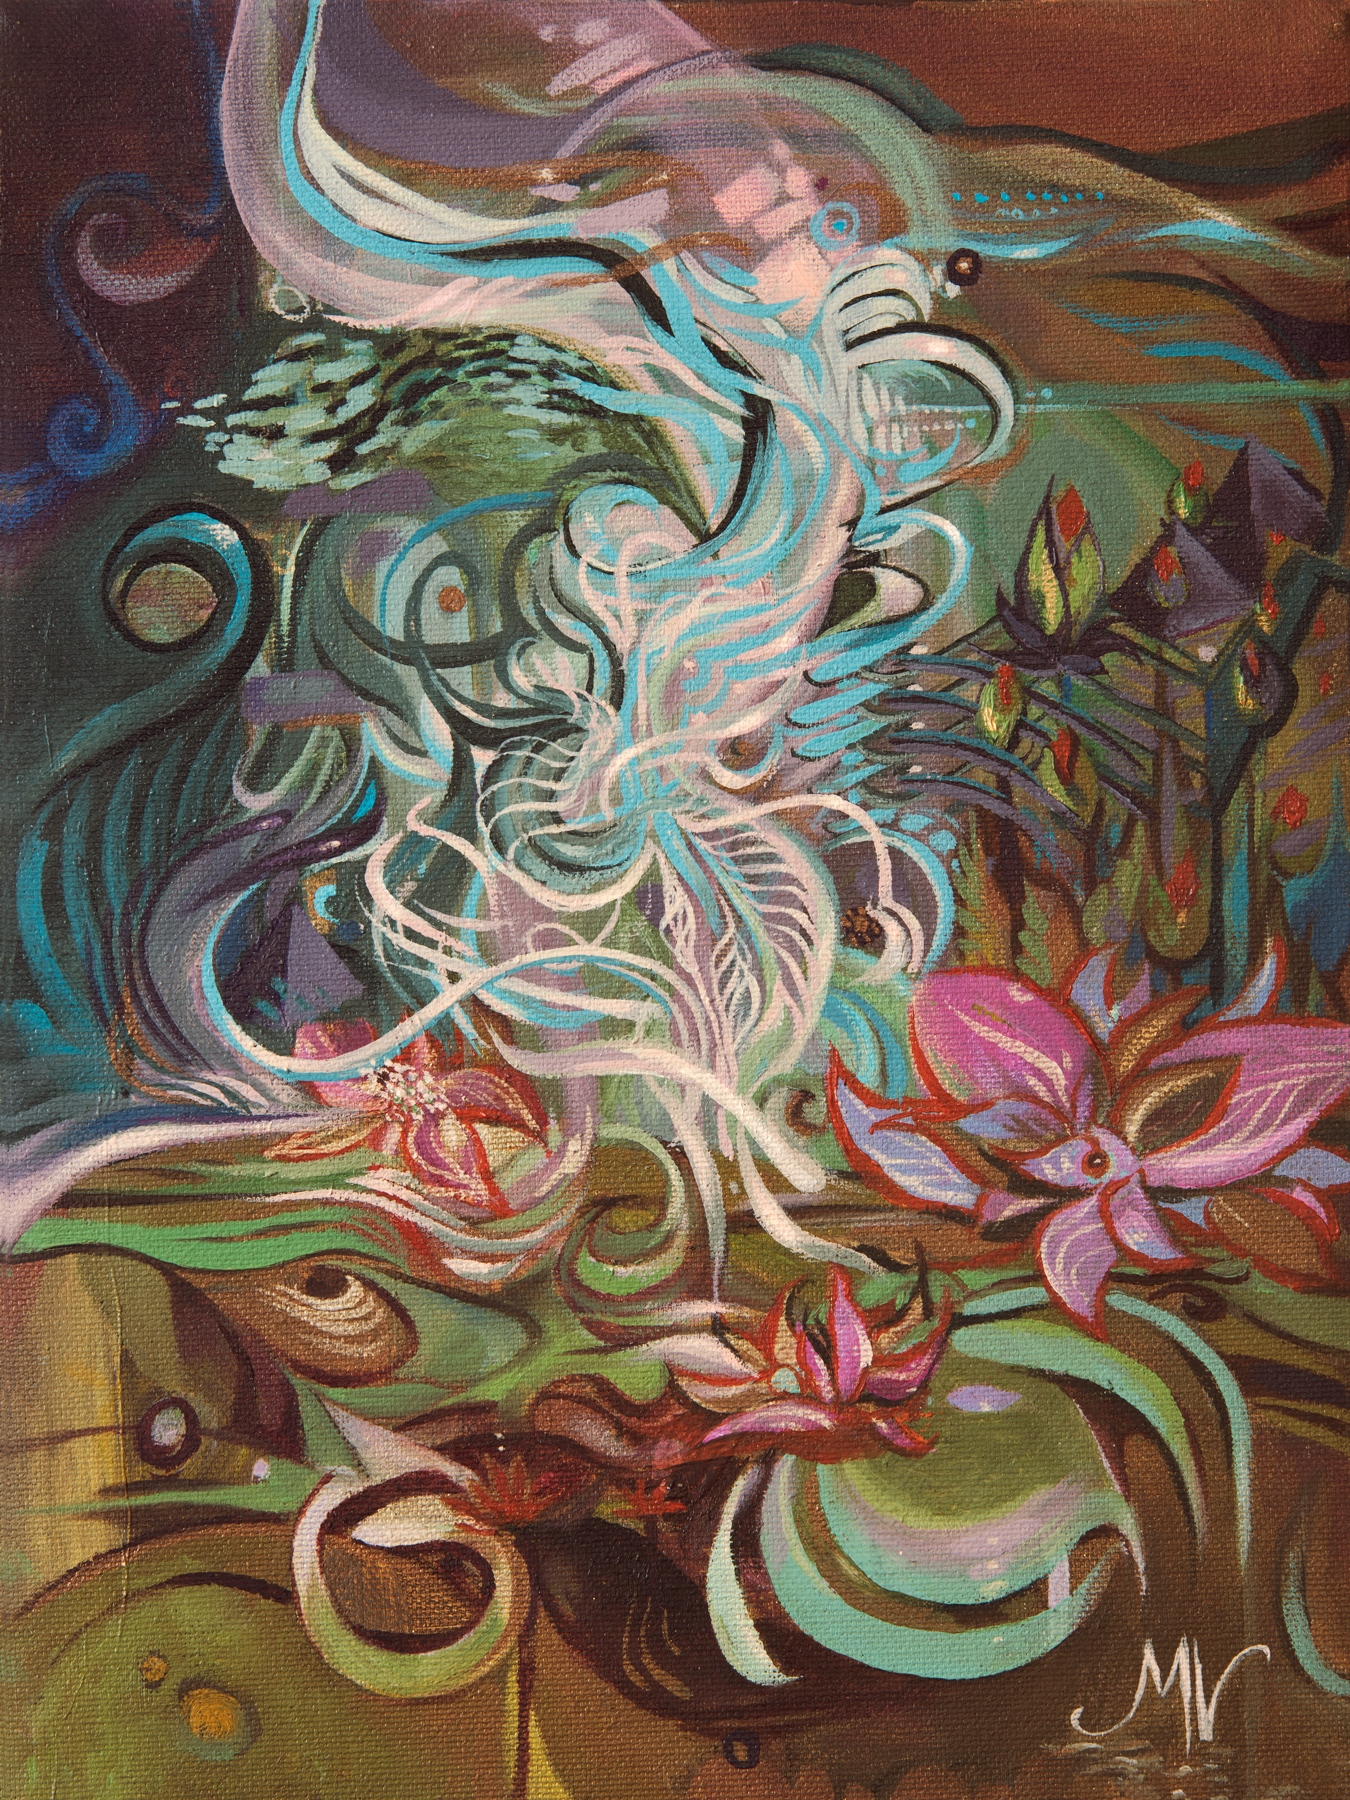 Lillies and Entities, 2009